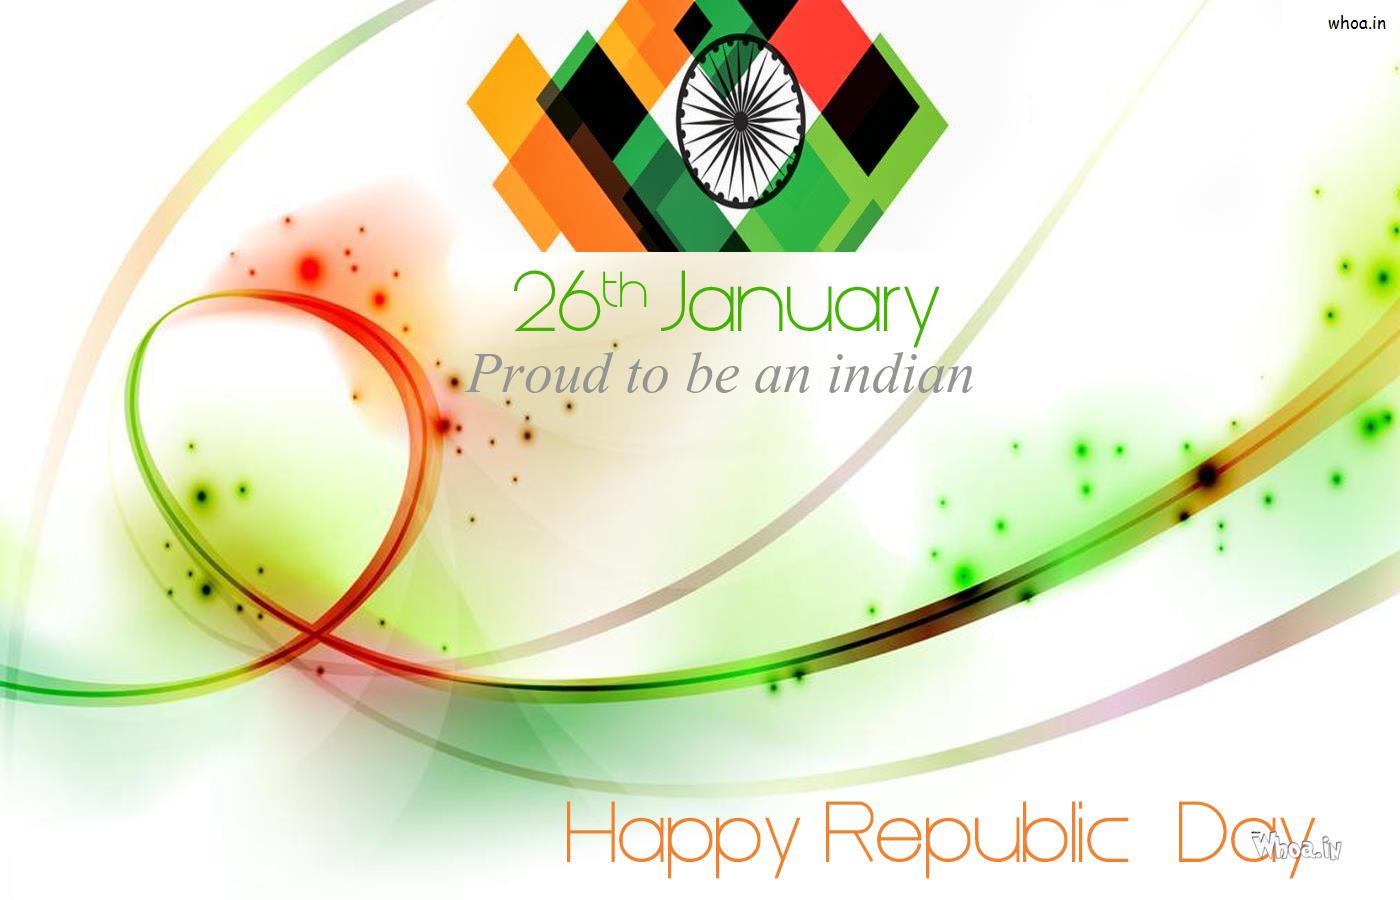 26th January And Happy Republic Day Hd Wallpaper - Hd Wallpaper 26 January Happy Republic Day - HD Wallpaper 